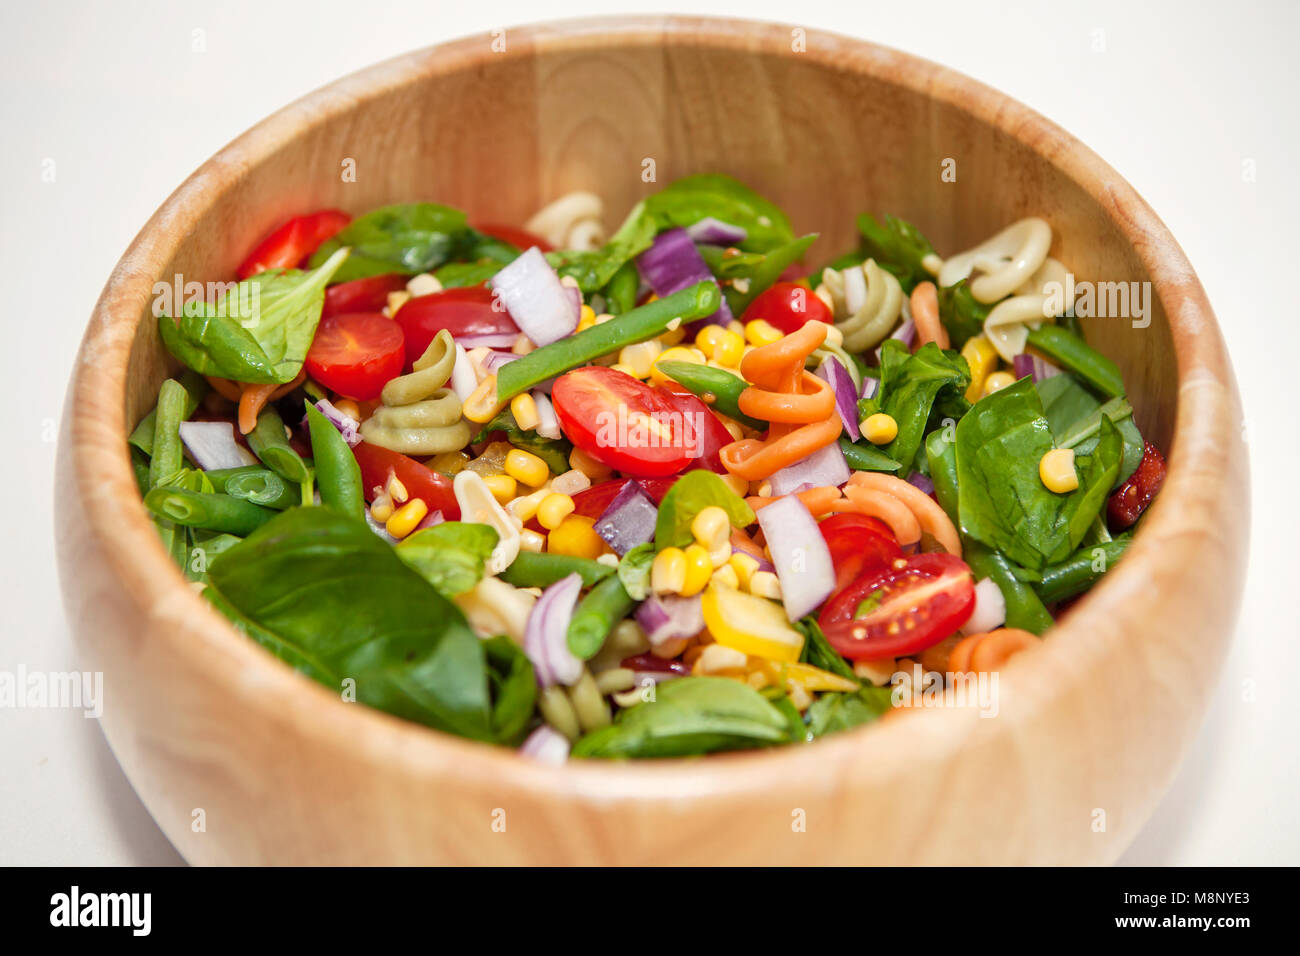 Pasta salad in a wooden bowl, with tomatoes, sweetcorn, onion, spinach Stock Photo